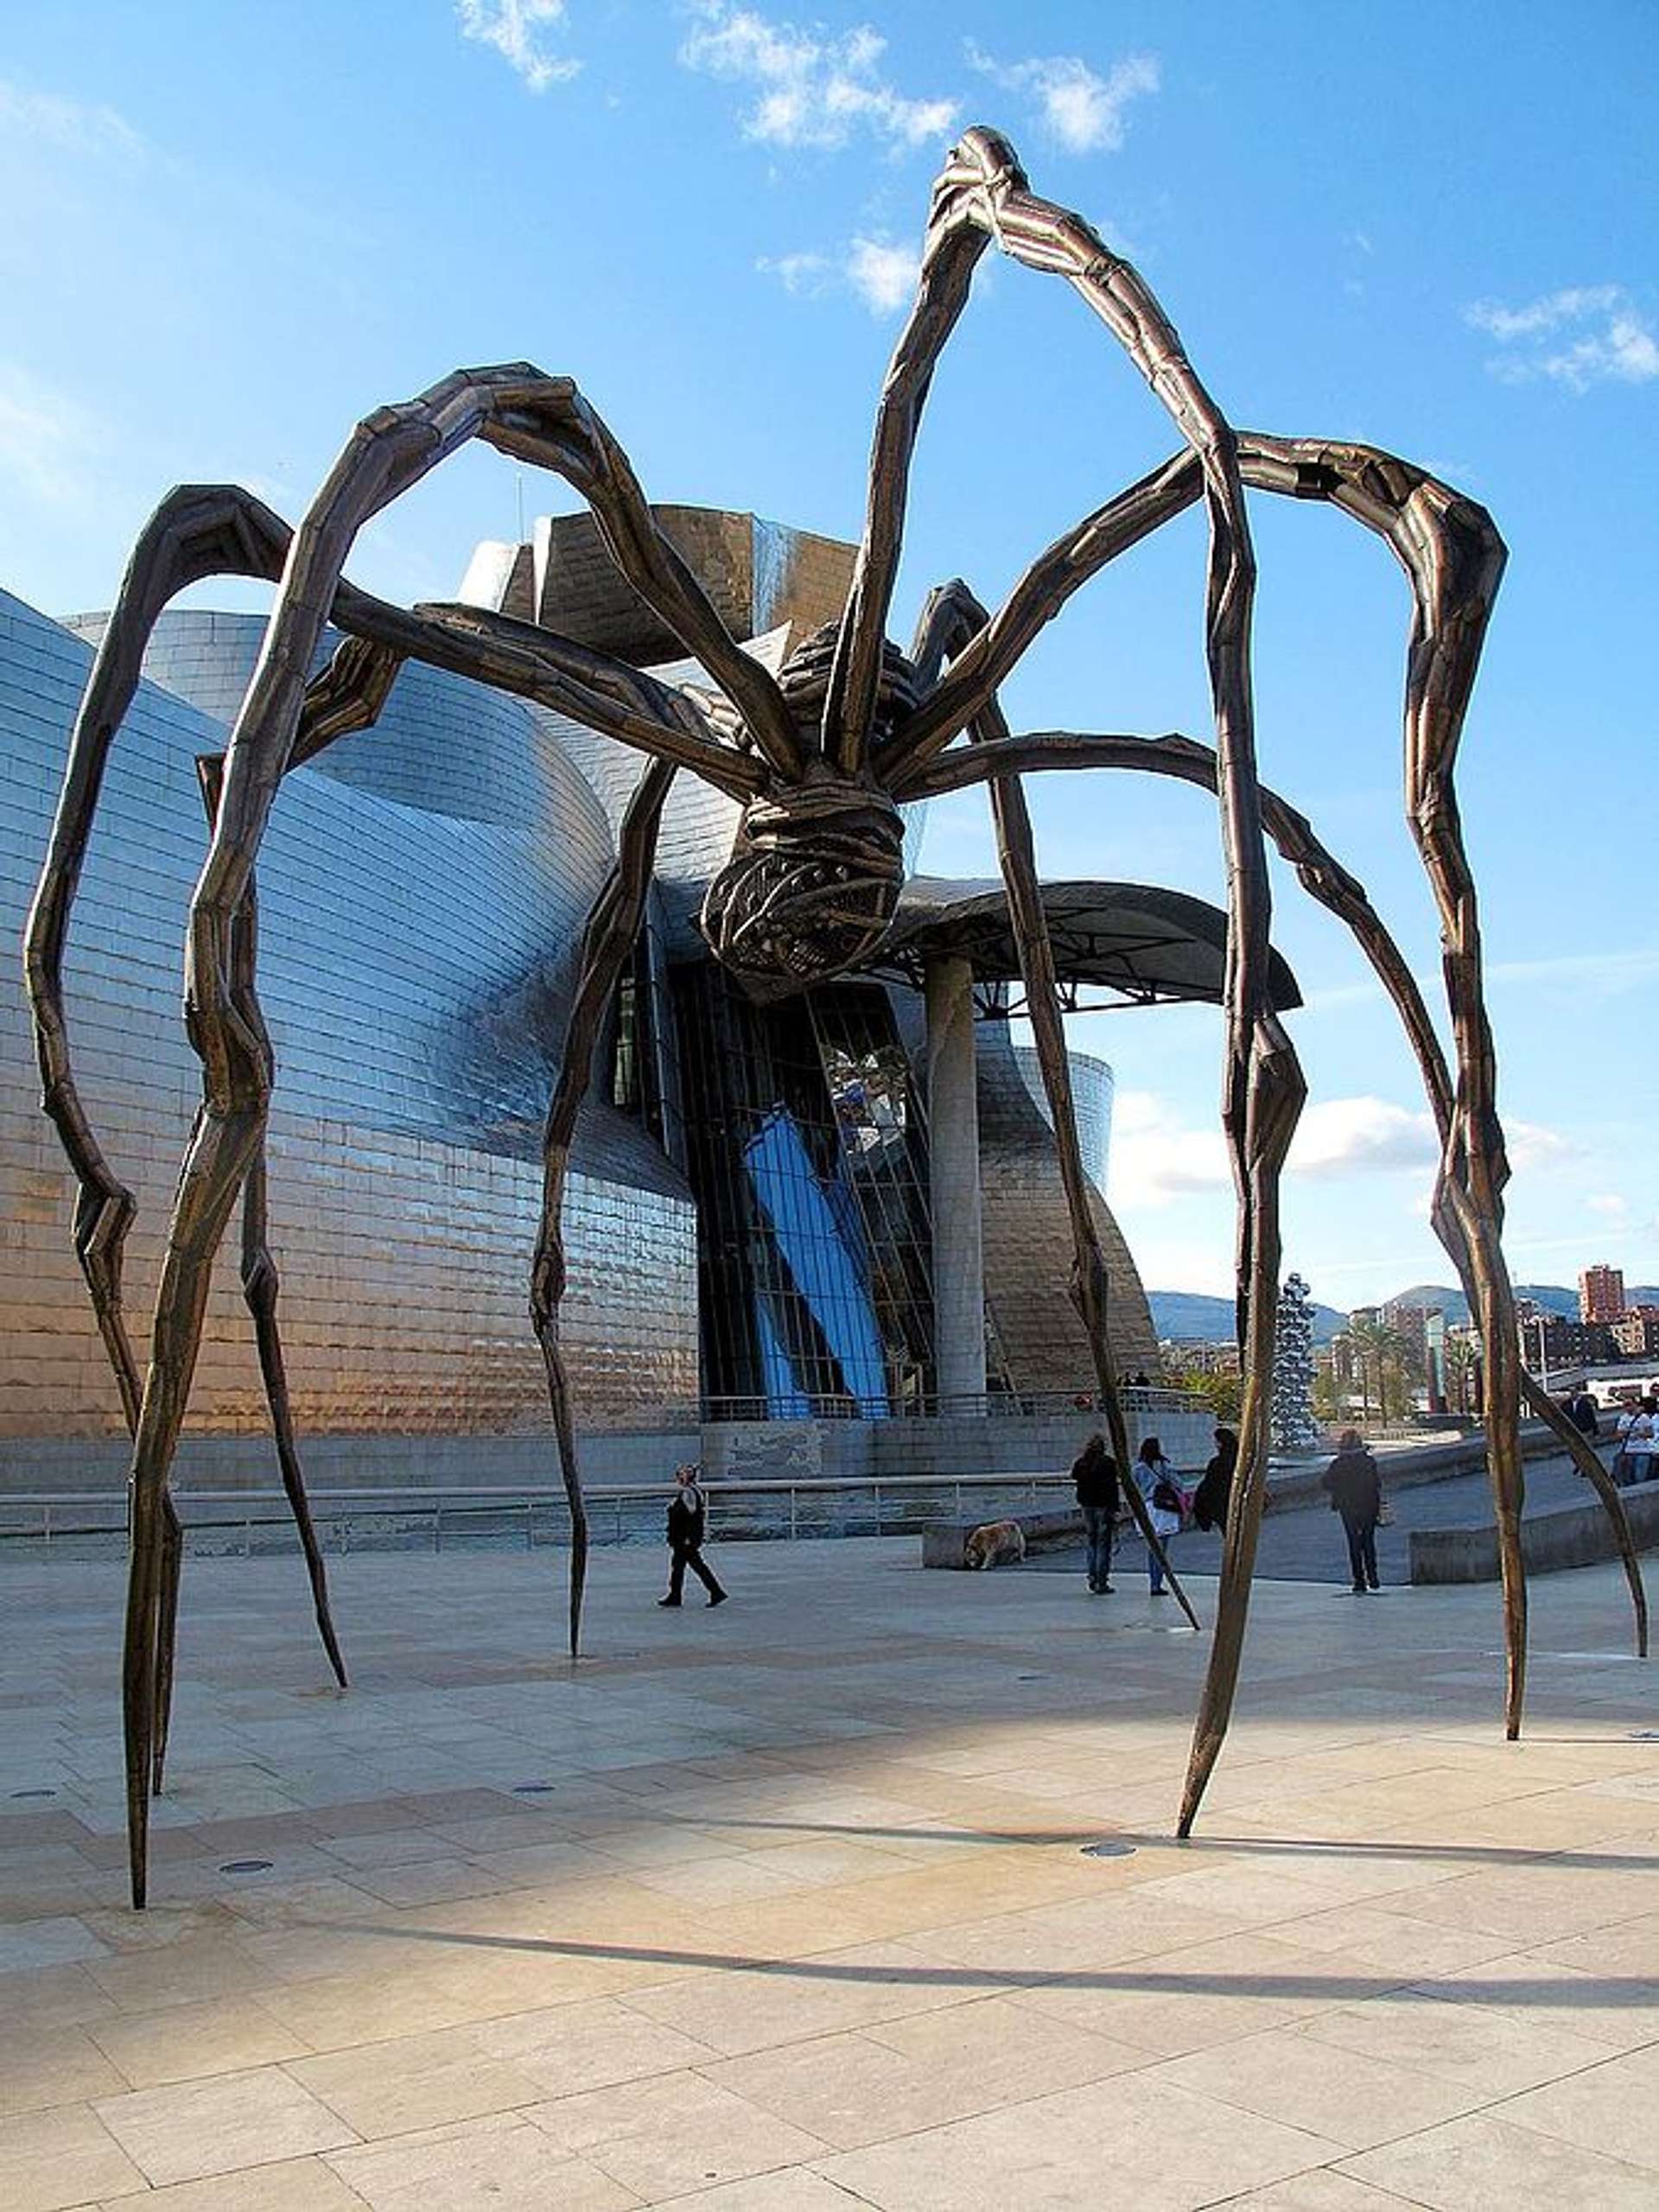 Louise Bourgeois spiders: Why she made them